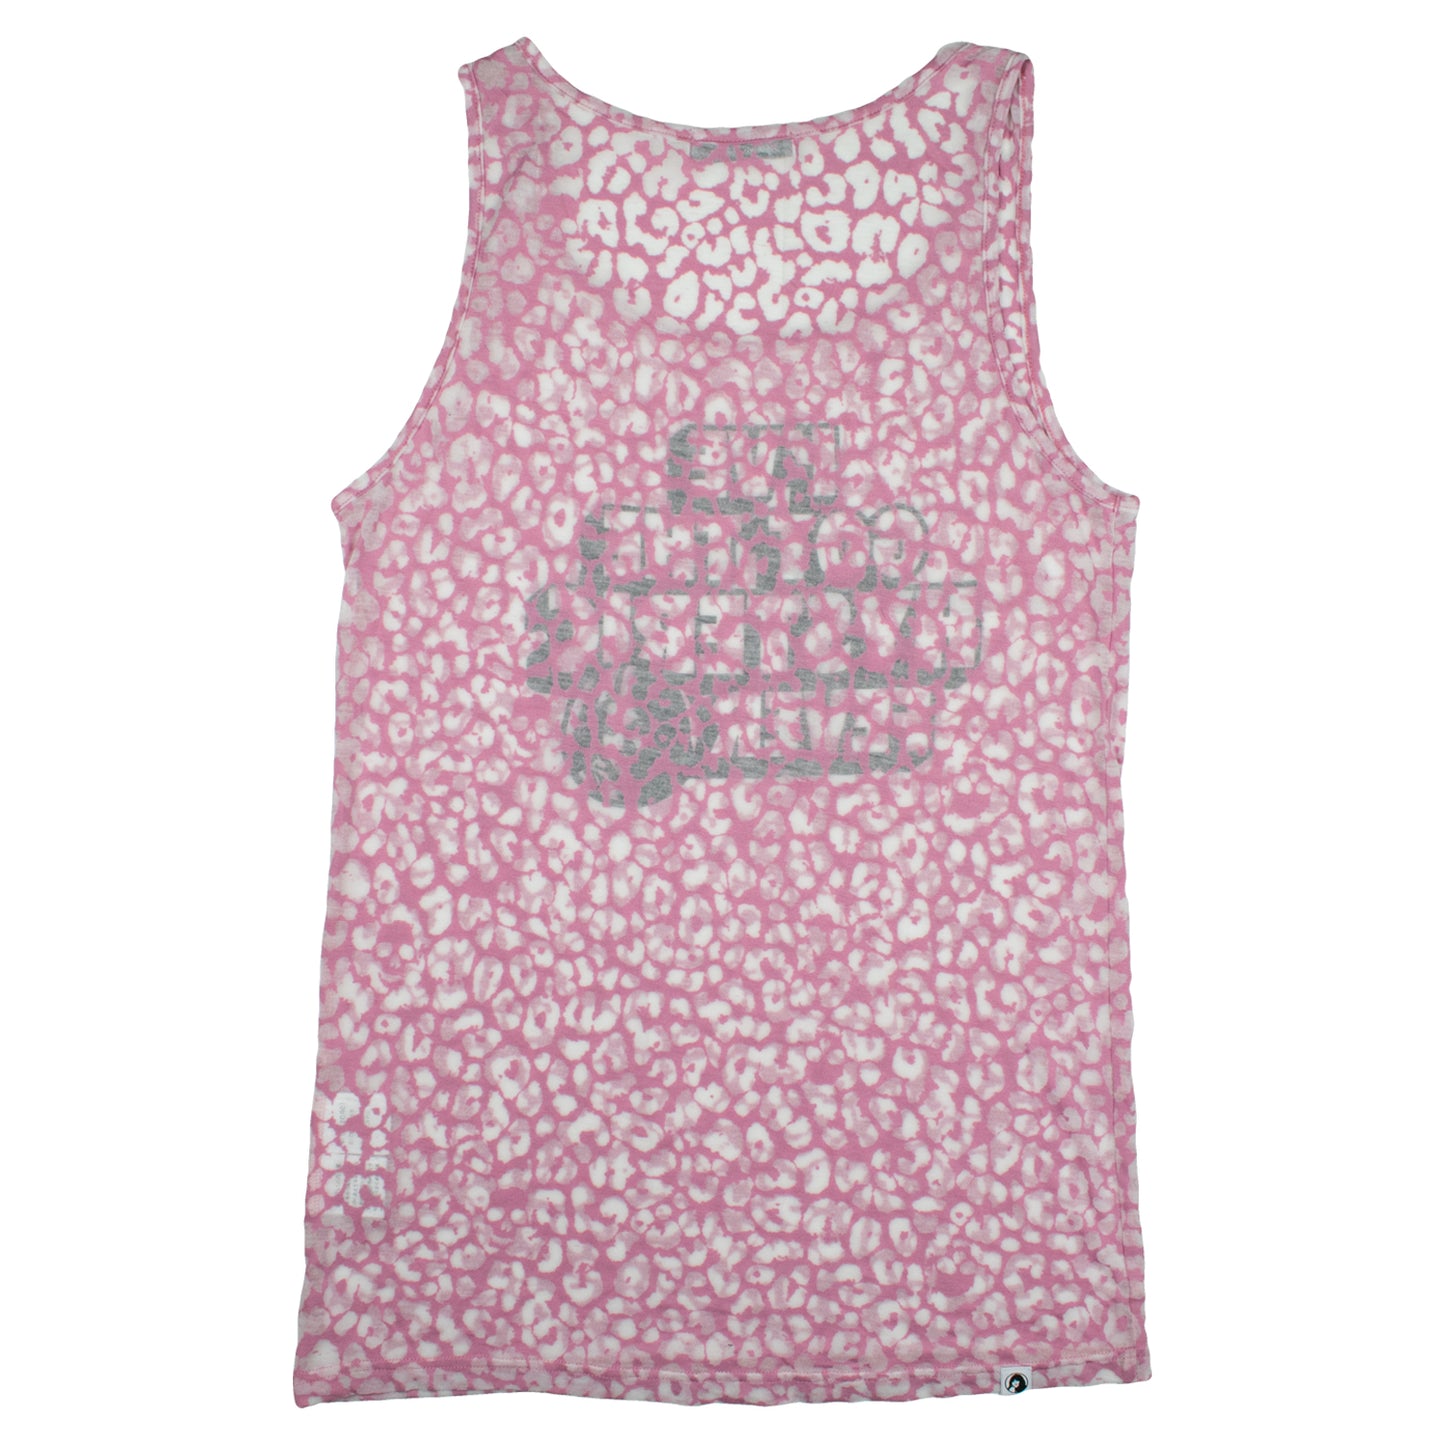 Hysteric Glamour Hysteric Fever Mesh Leopard Print Tank Top